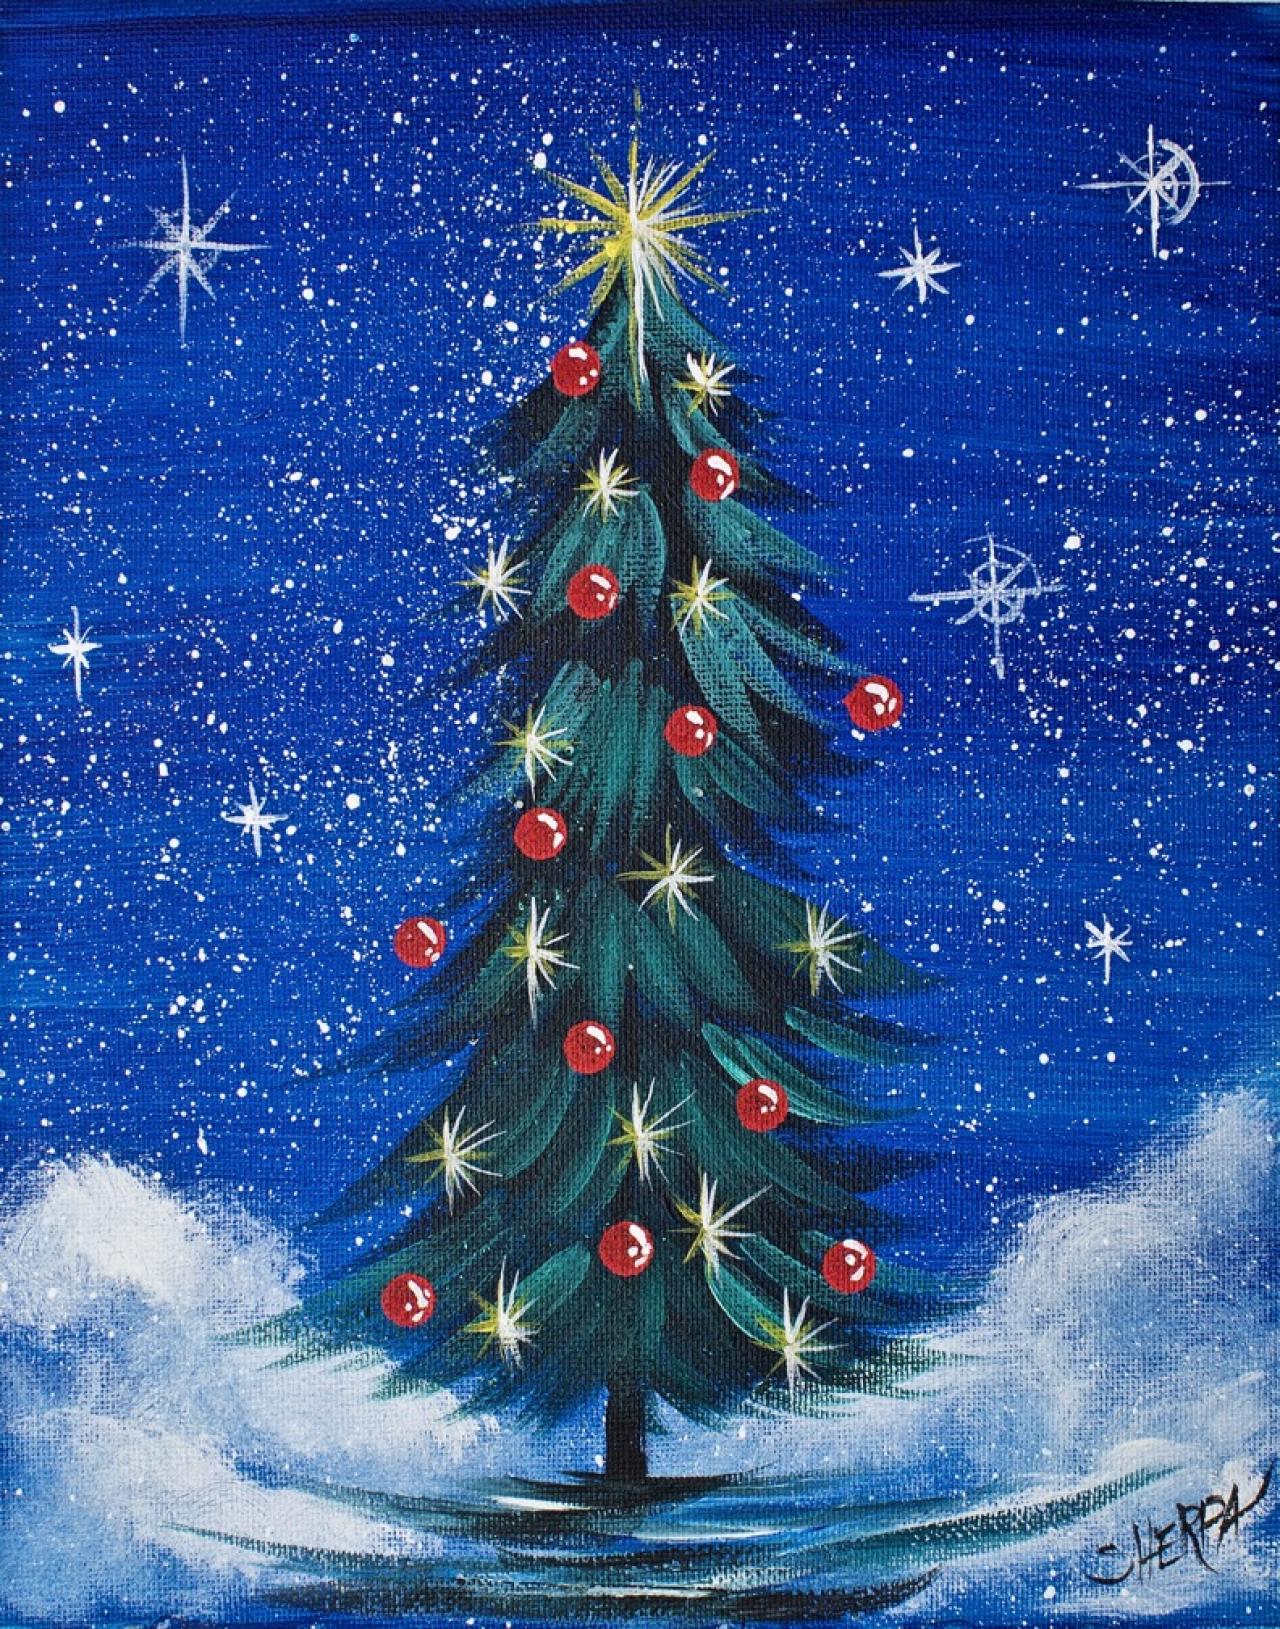 Simple Christmas TREE Step By Step Acrylic Painting On Canvas For